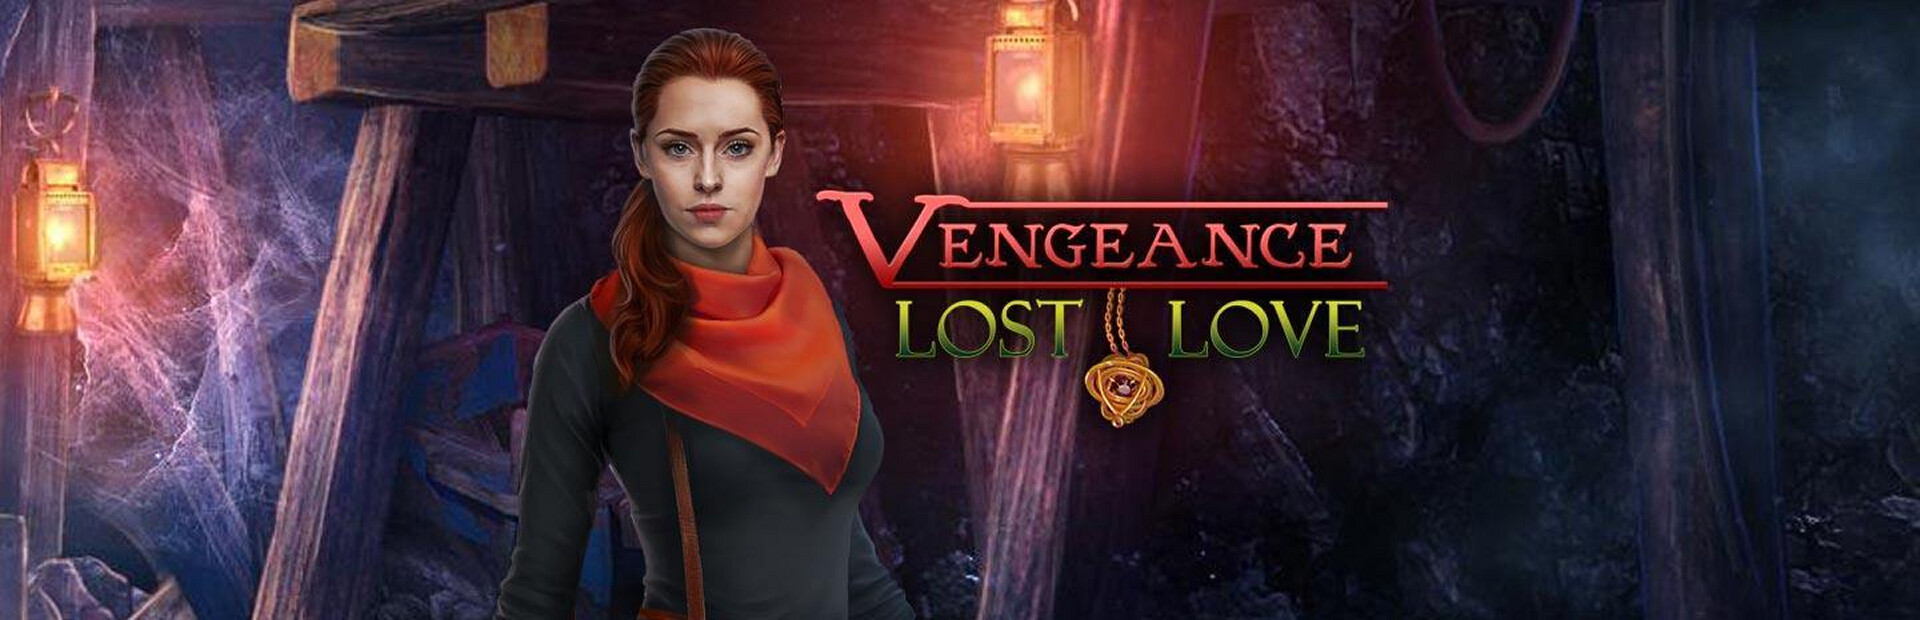 Vengeance: Lost Love cover image